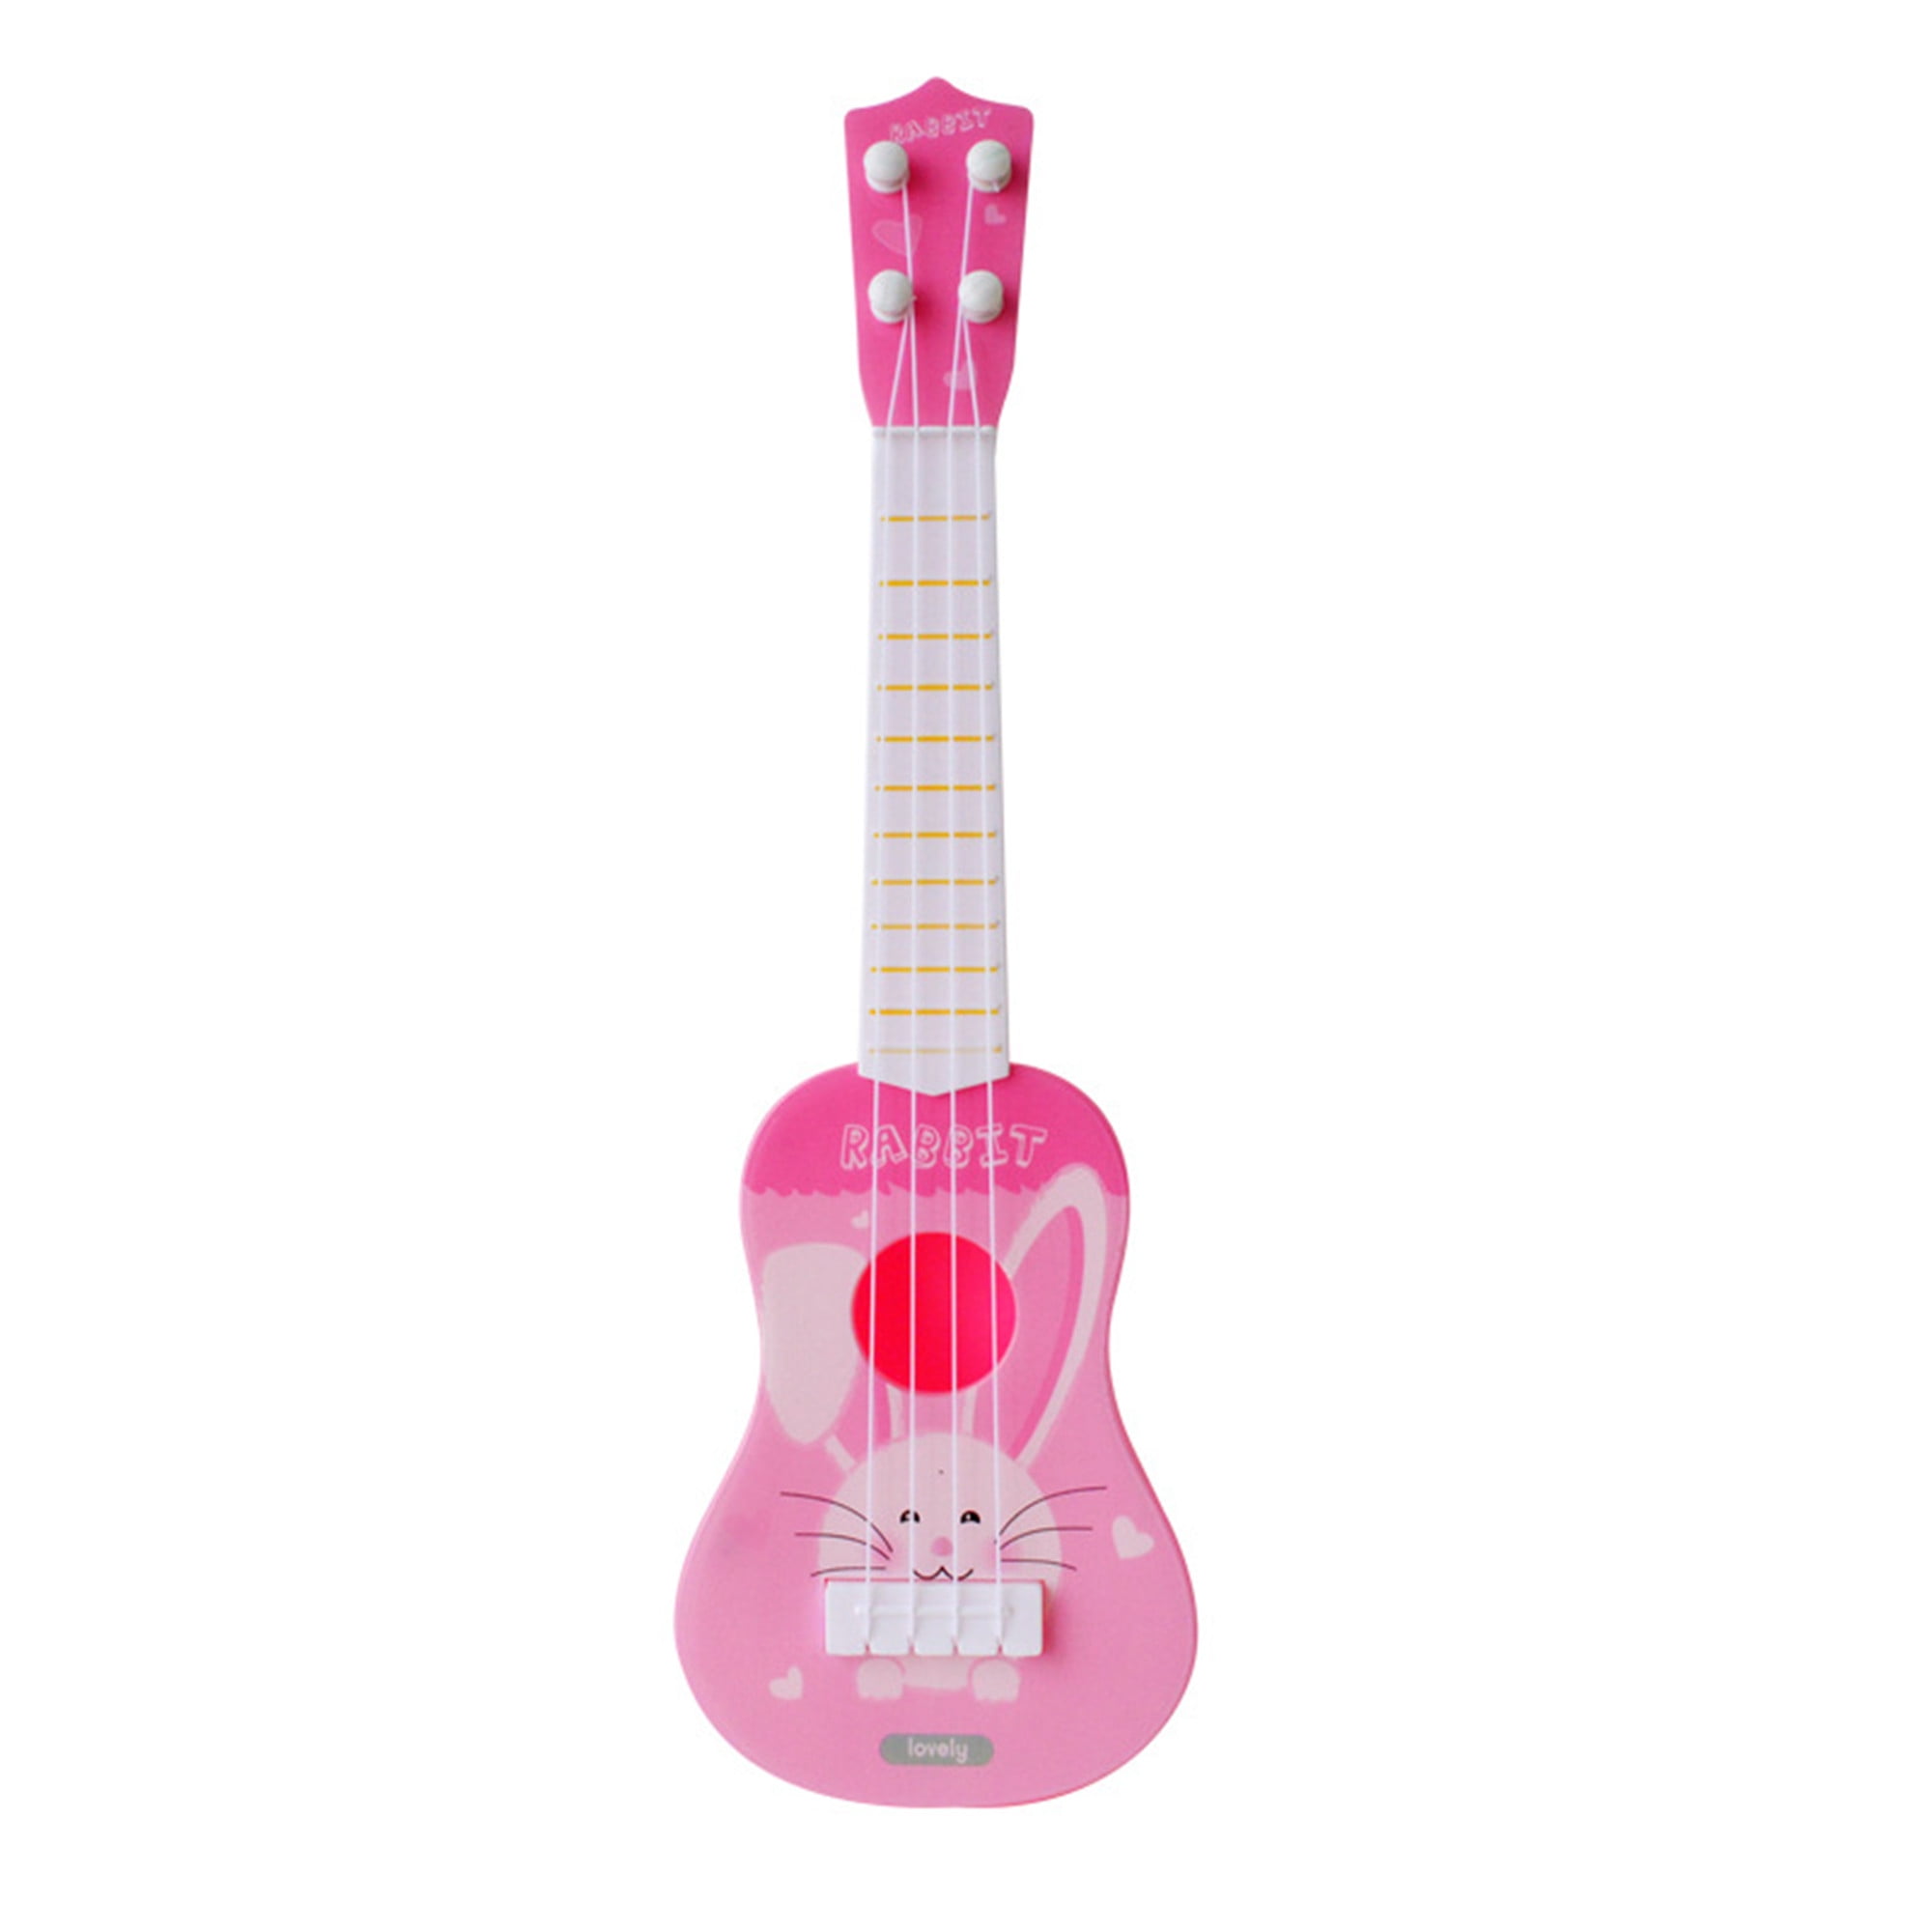 Mini Guitar Toy Kids Baby Musical Instrument Funny Music Educational Toy Gift 